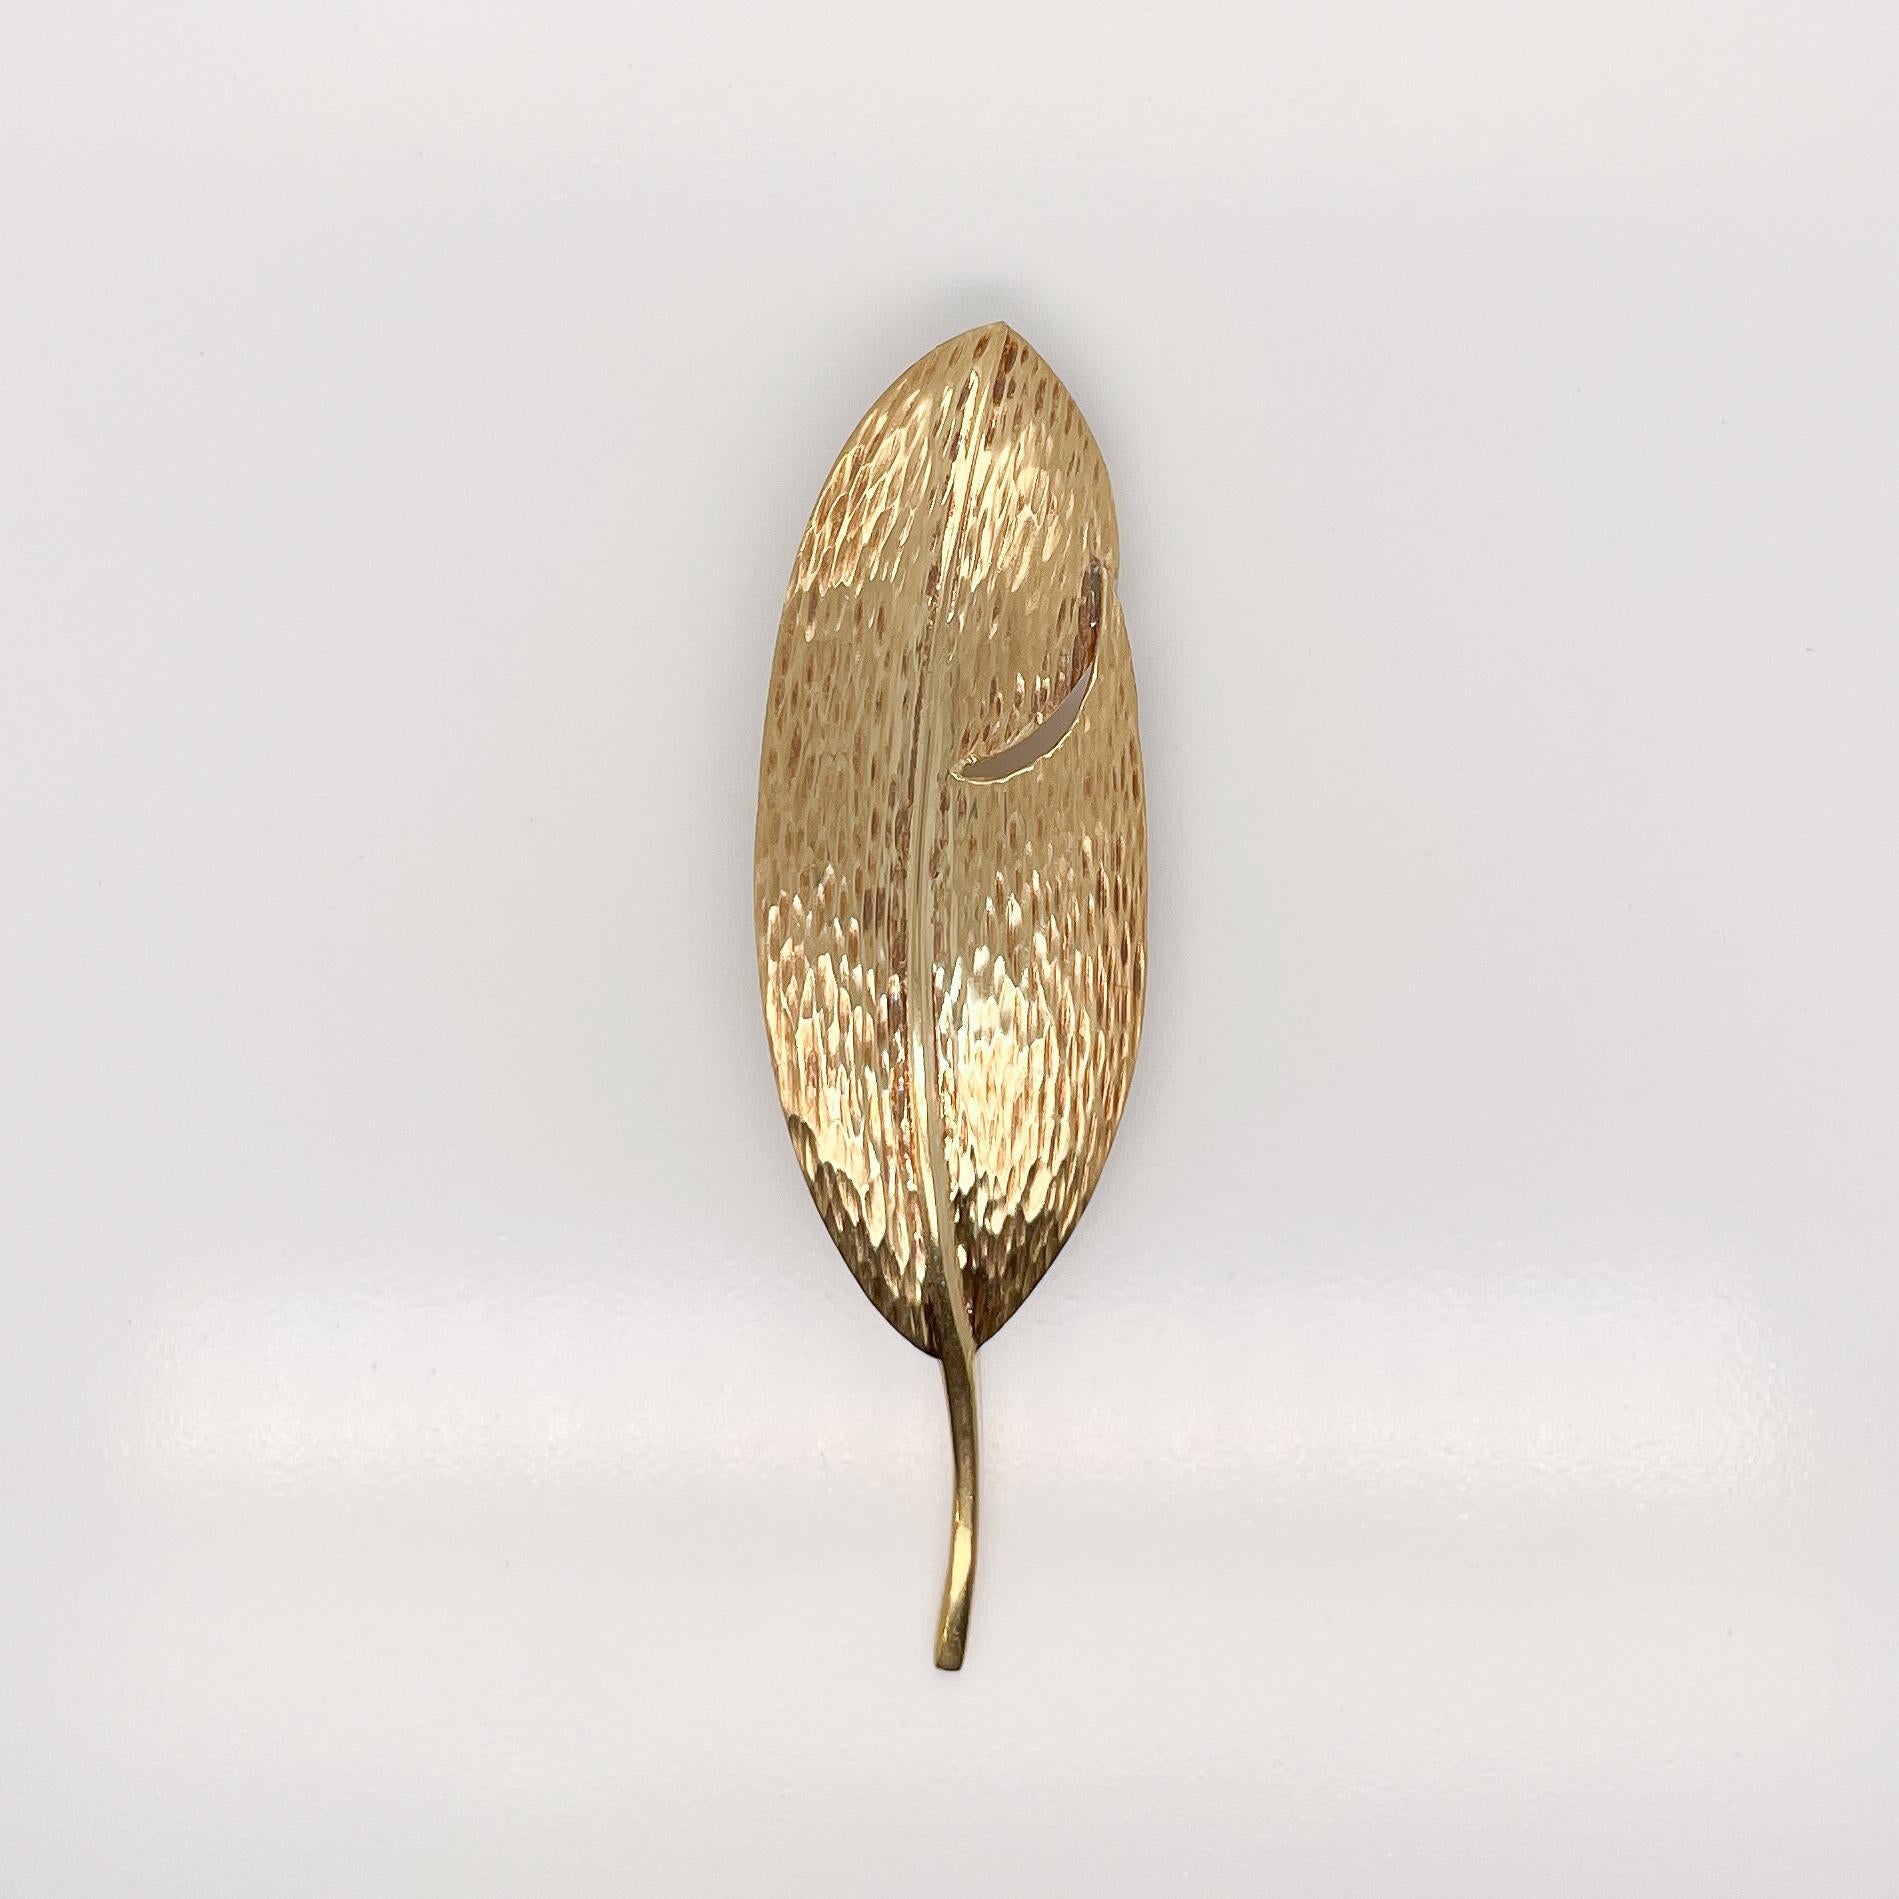 A very fine Tiffany & Co. 18K yellow gold leaf brooch or pin.

By Angela Cummings. 

With a wonderfully textured and hand hammered surface.

Fully hallmarked on the stem.

Simply a terrific brooch by one of Tiffany's best designers!

Date:
20th